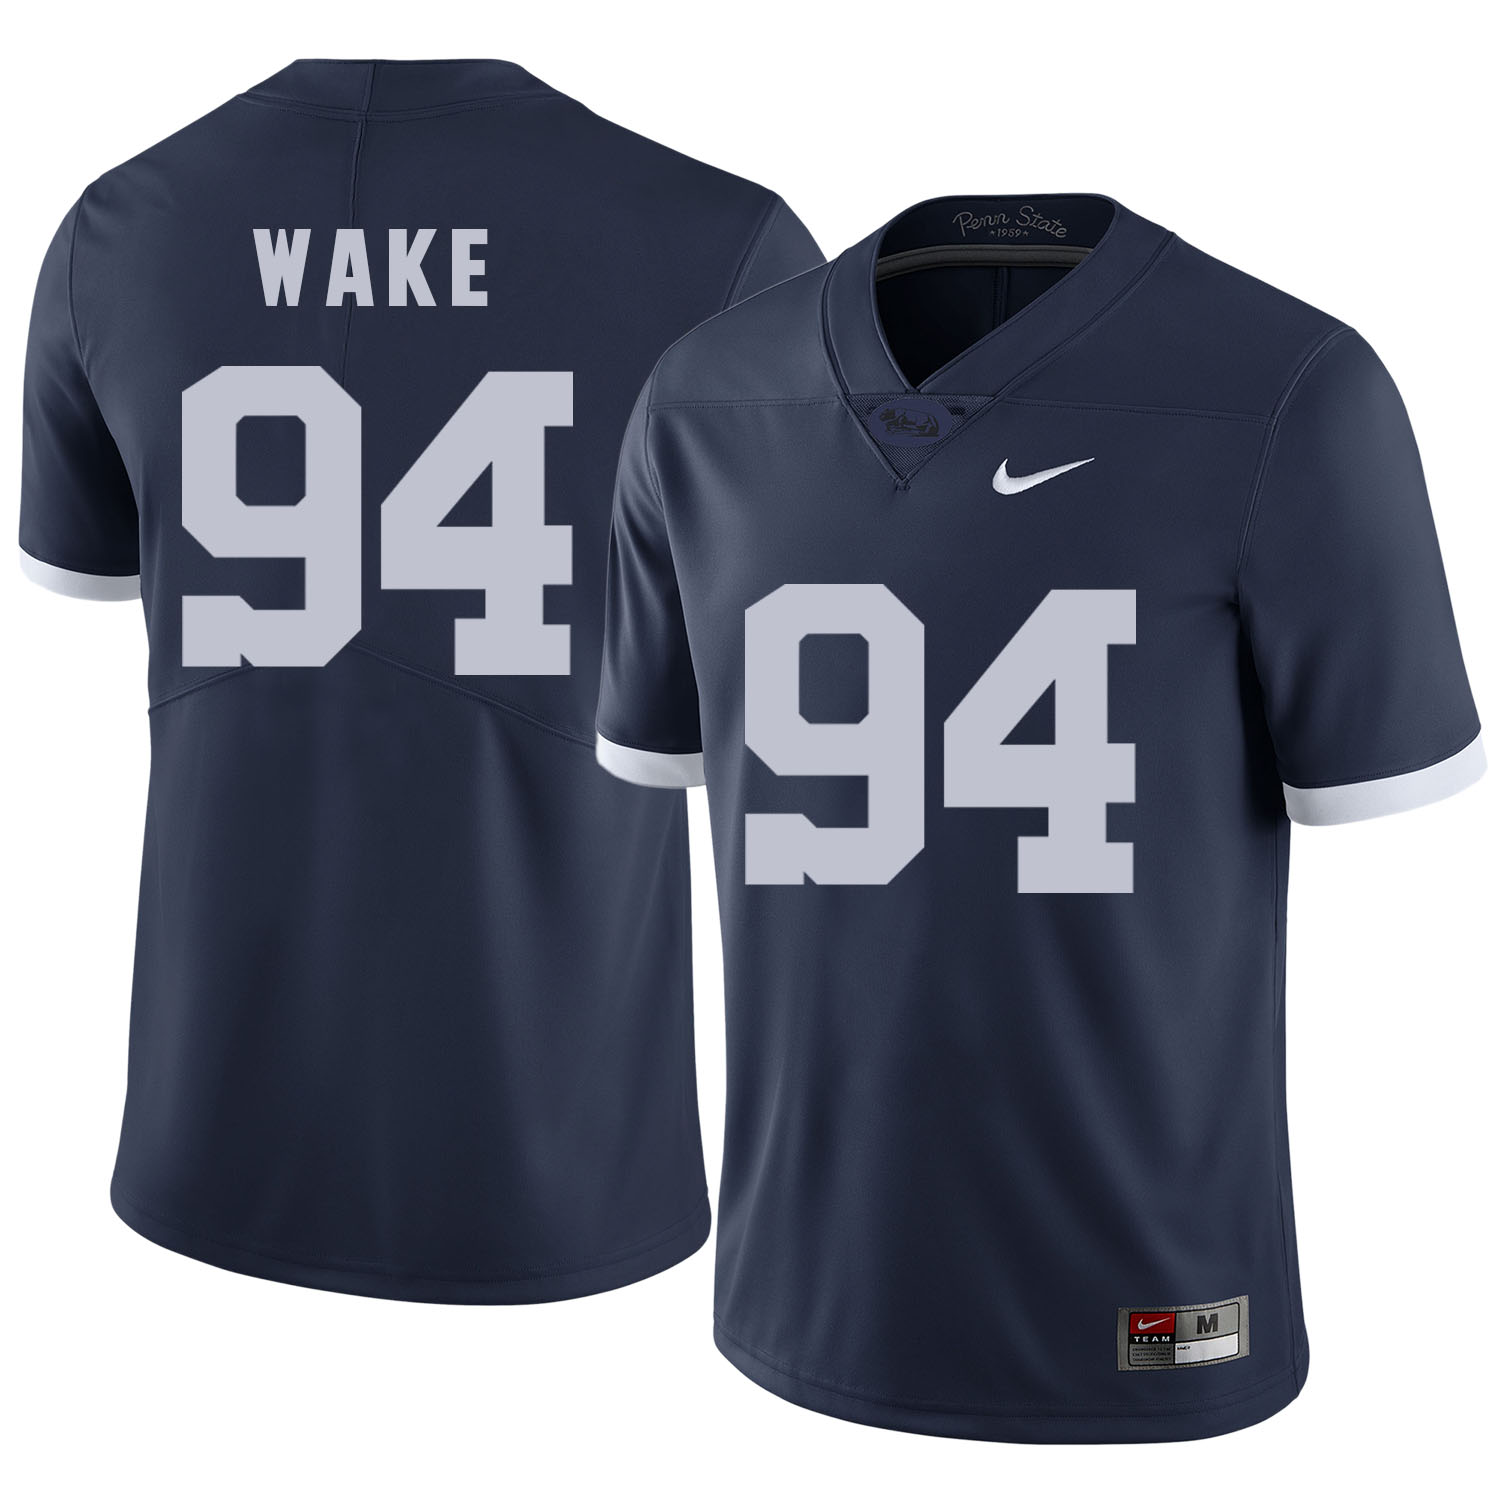 Penn State Nittany Lions 94 Cameron Wake Navy College Football Jersey